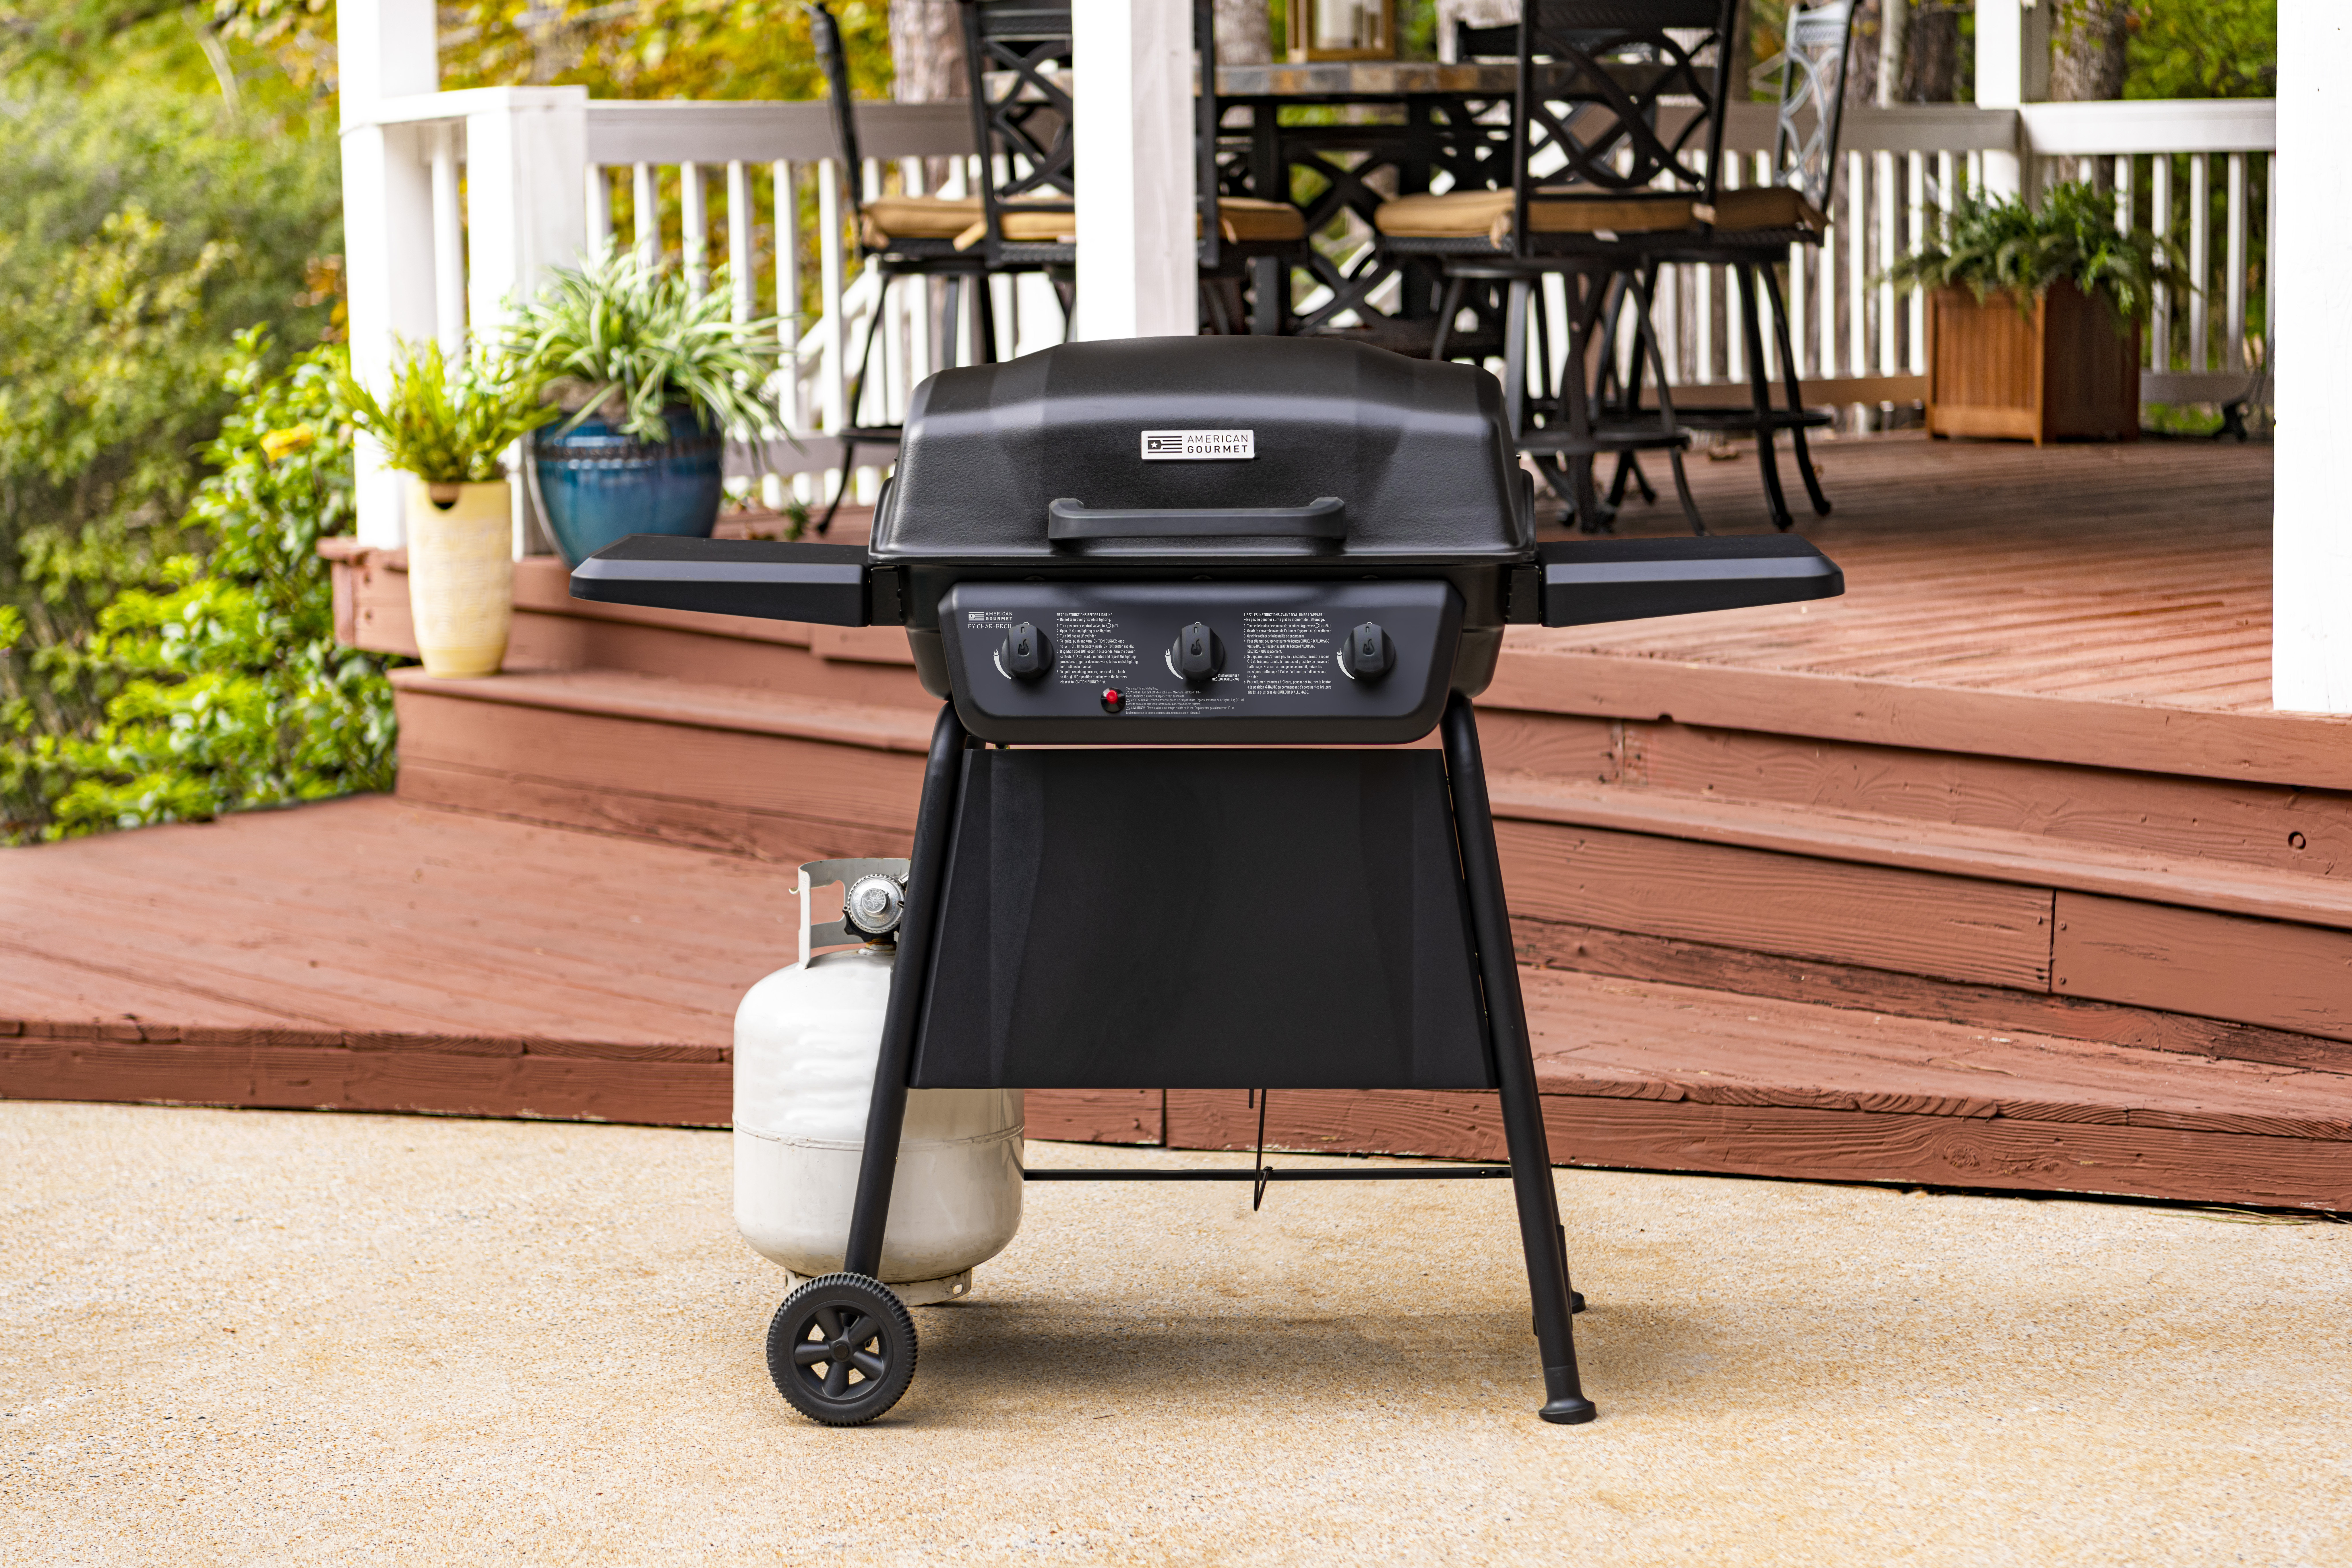 10 Compact Grills That'll Turn a Small Space into a Countertop